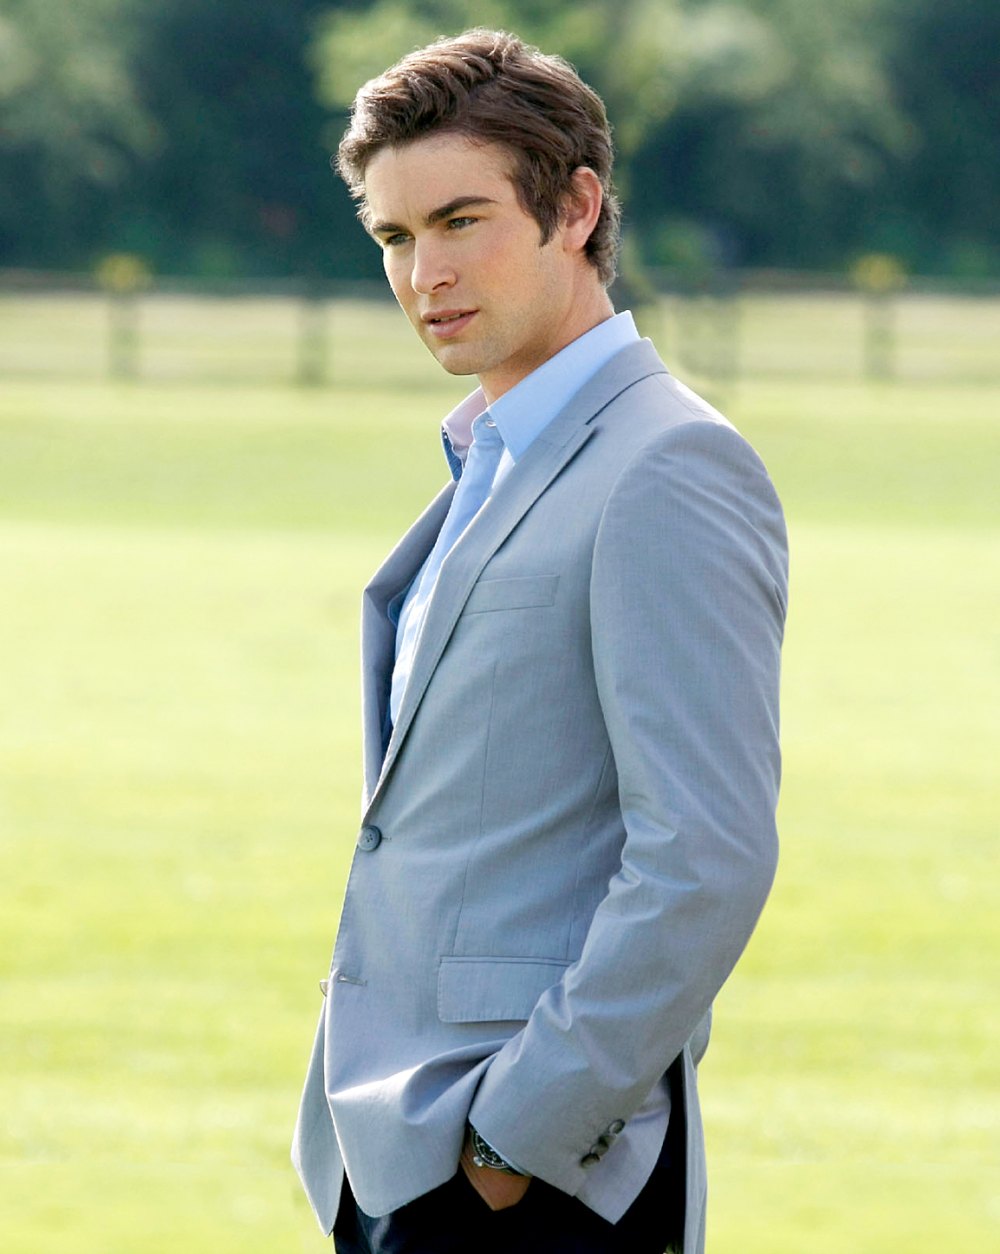 Chace Crawford as Nate on Gossip Girl